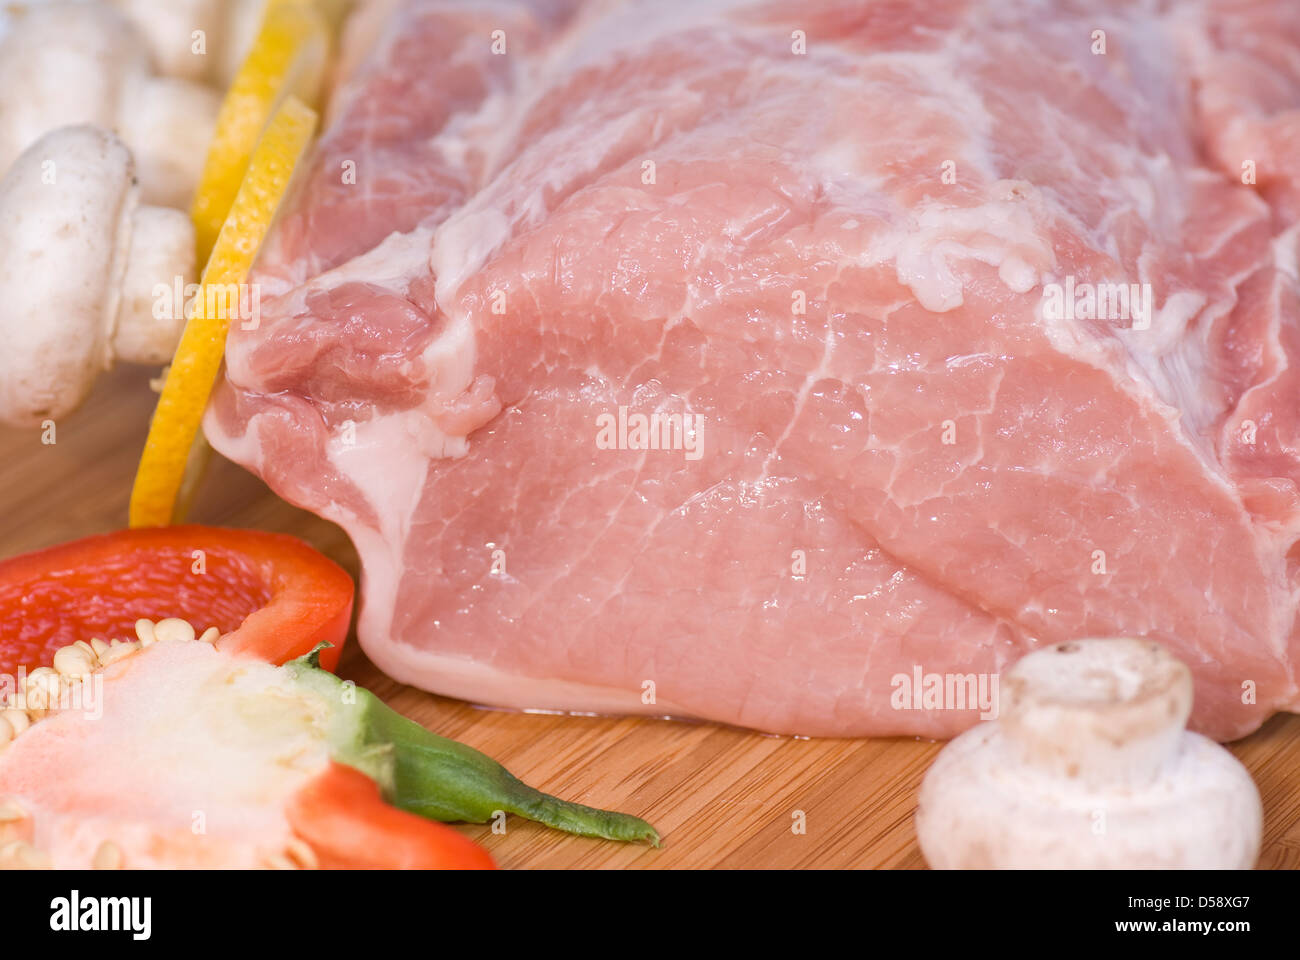 part of pork loin on board with vegetables Stock Photo